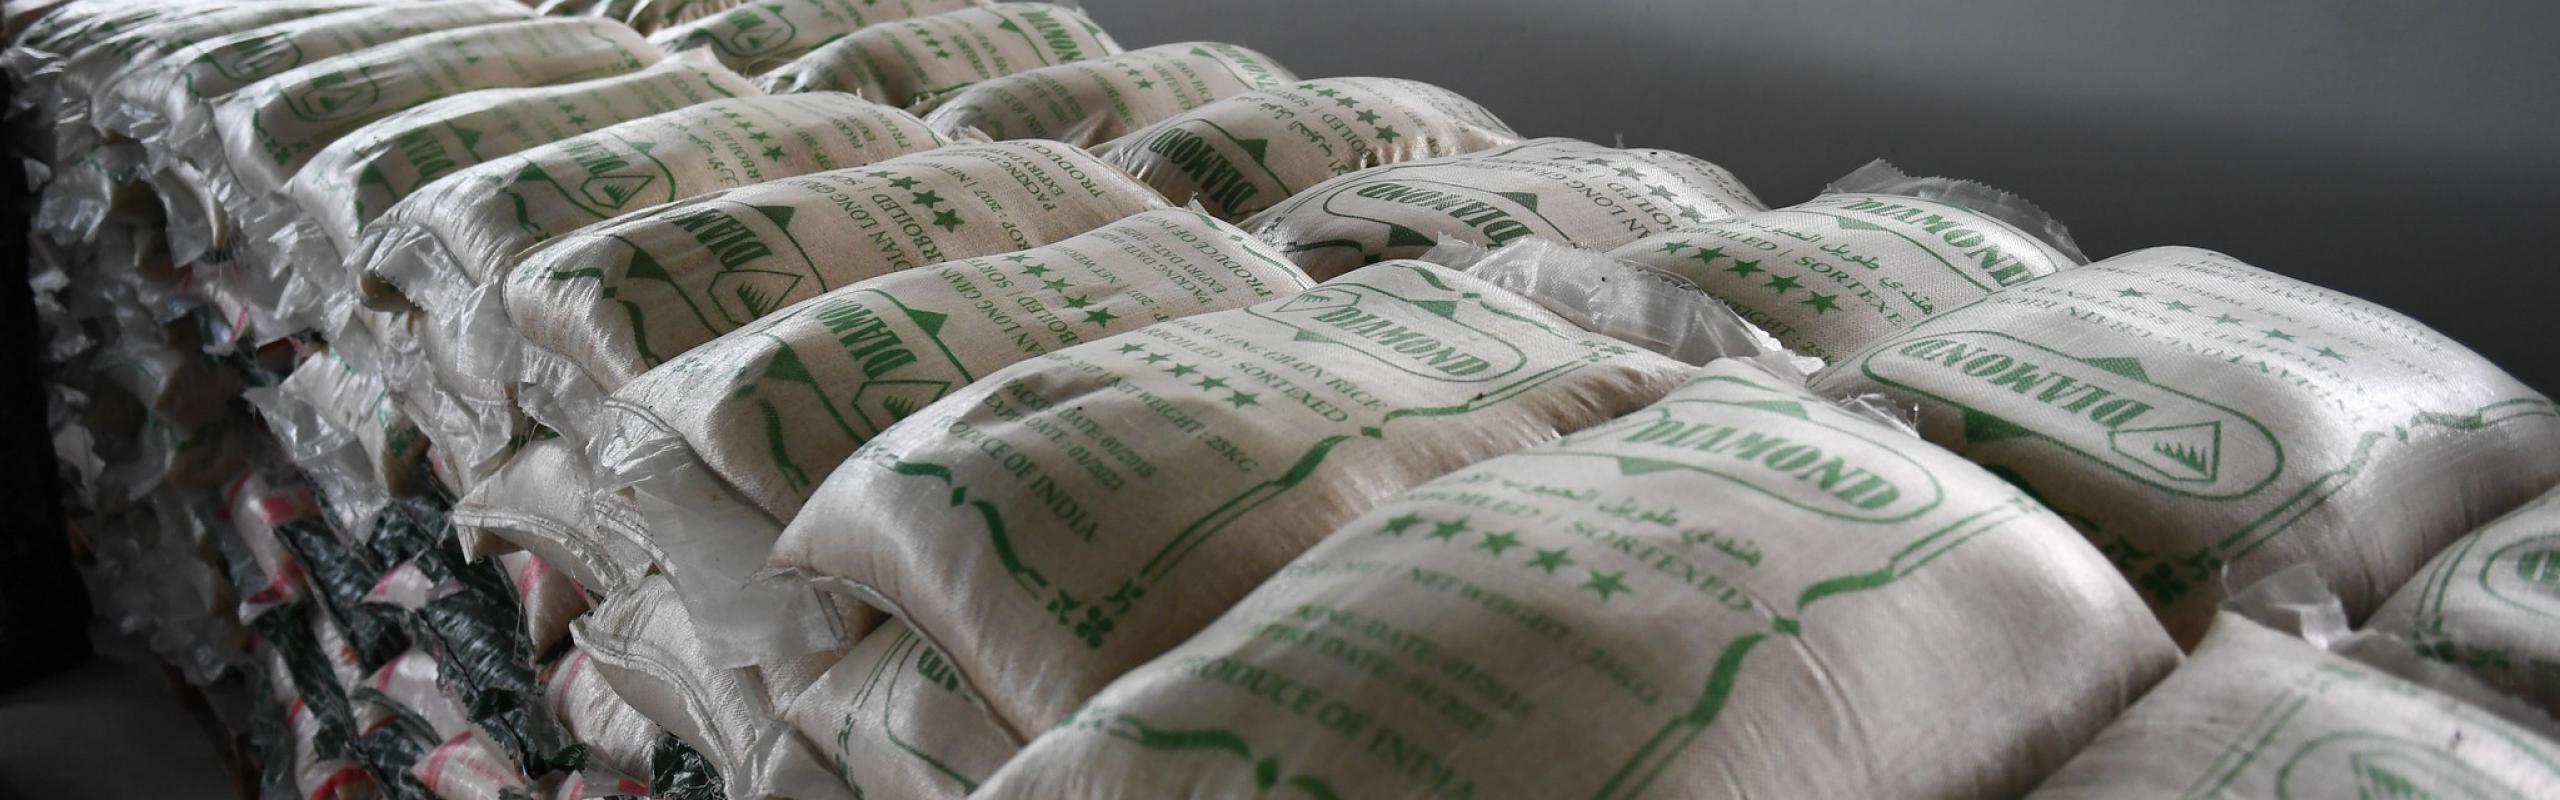  Bags of rice, wheat flour, and sugar stacked in warehouse in Uganda.